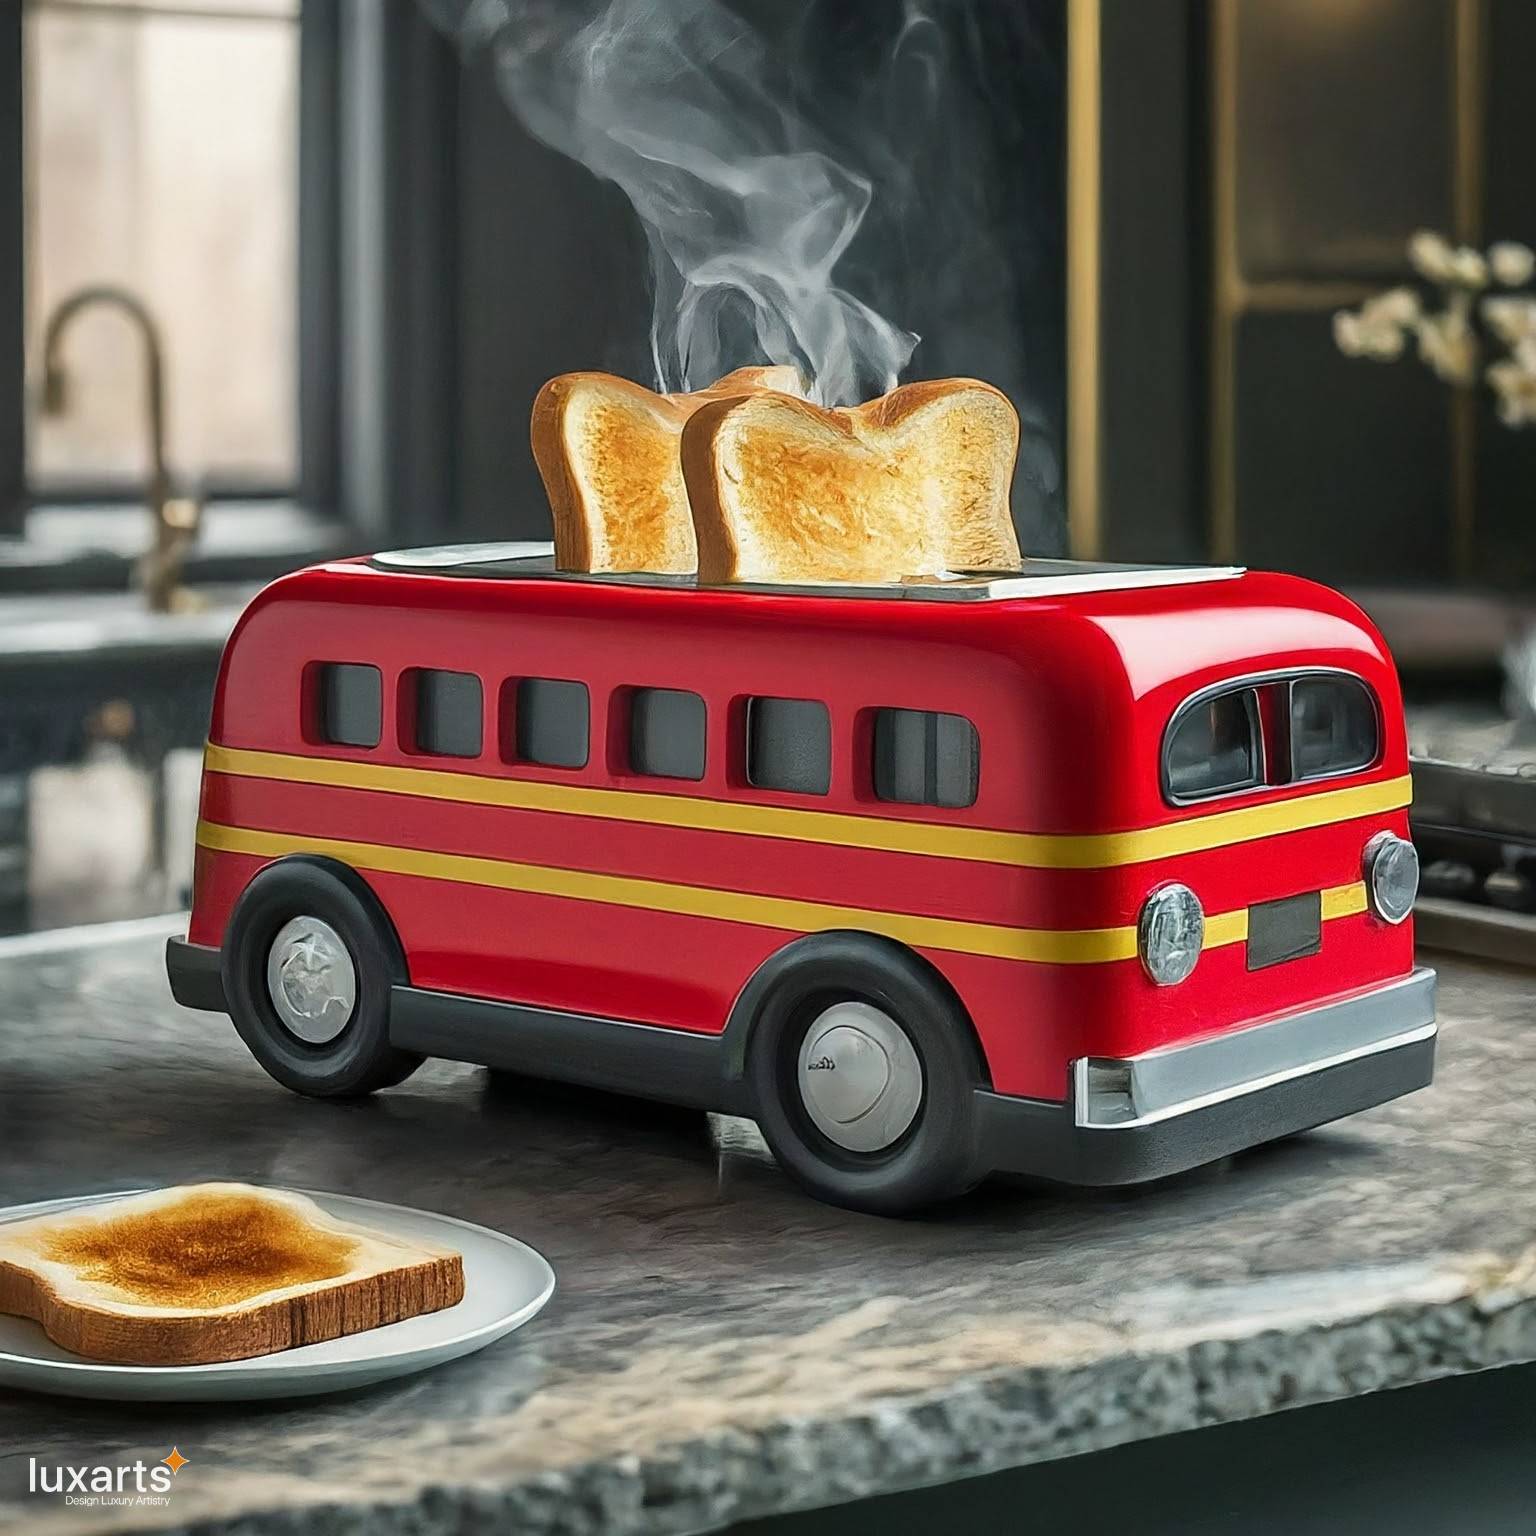 School Bus Shaped Toaster: Adding Fun to Breakfast Time luxarts school bus toaster 3